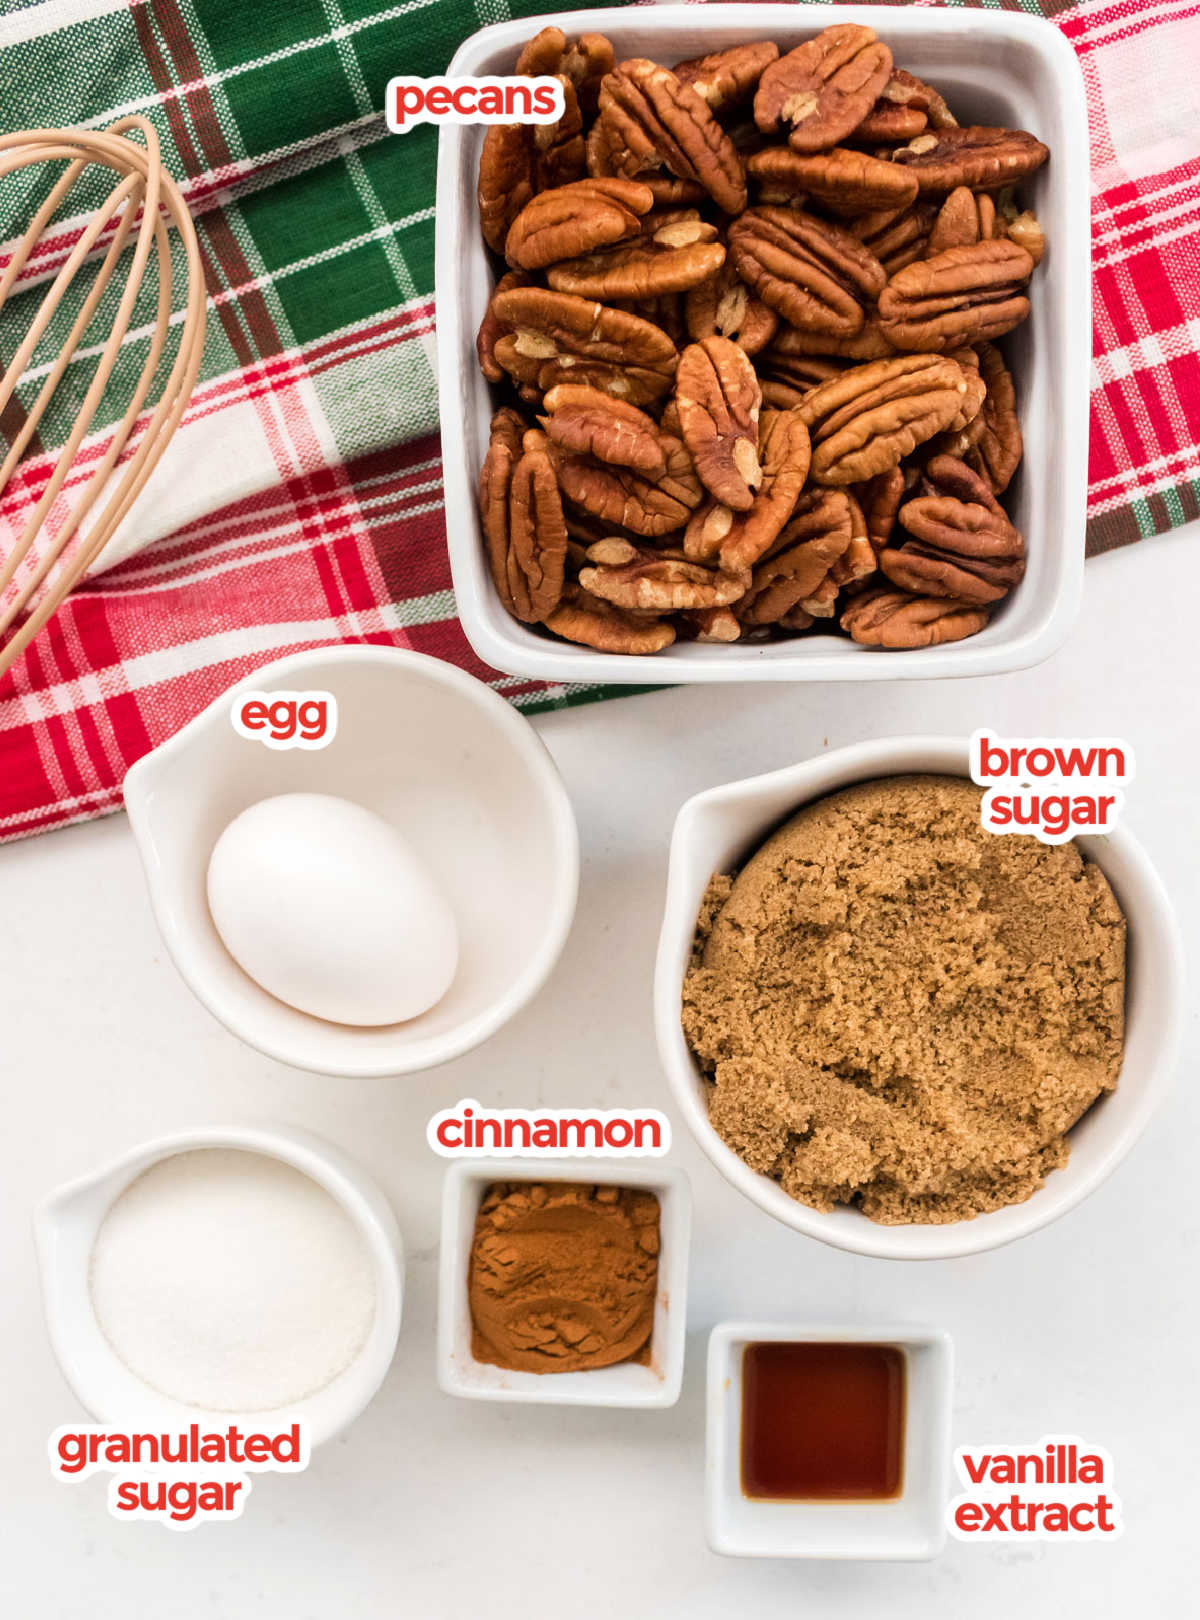 All the ingredients necessary to make Candied Pecan including Pecans, Sugar, Brown Sugar, Egg, Cinnamon and Vanilla.